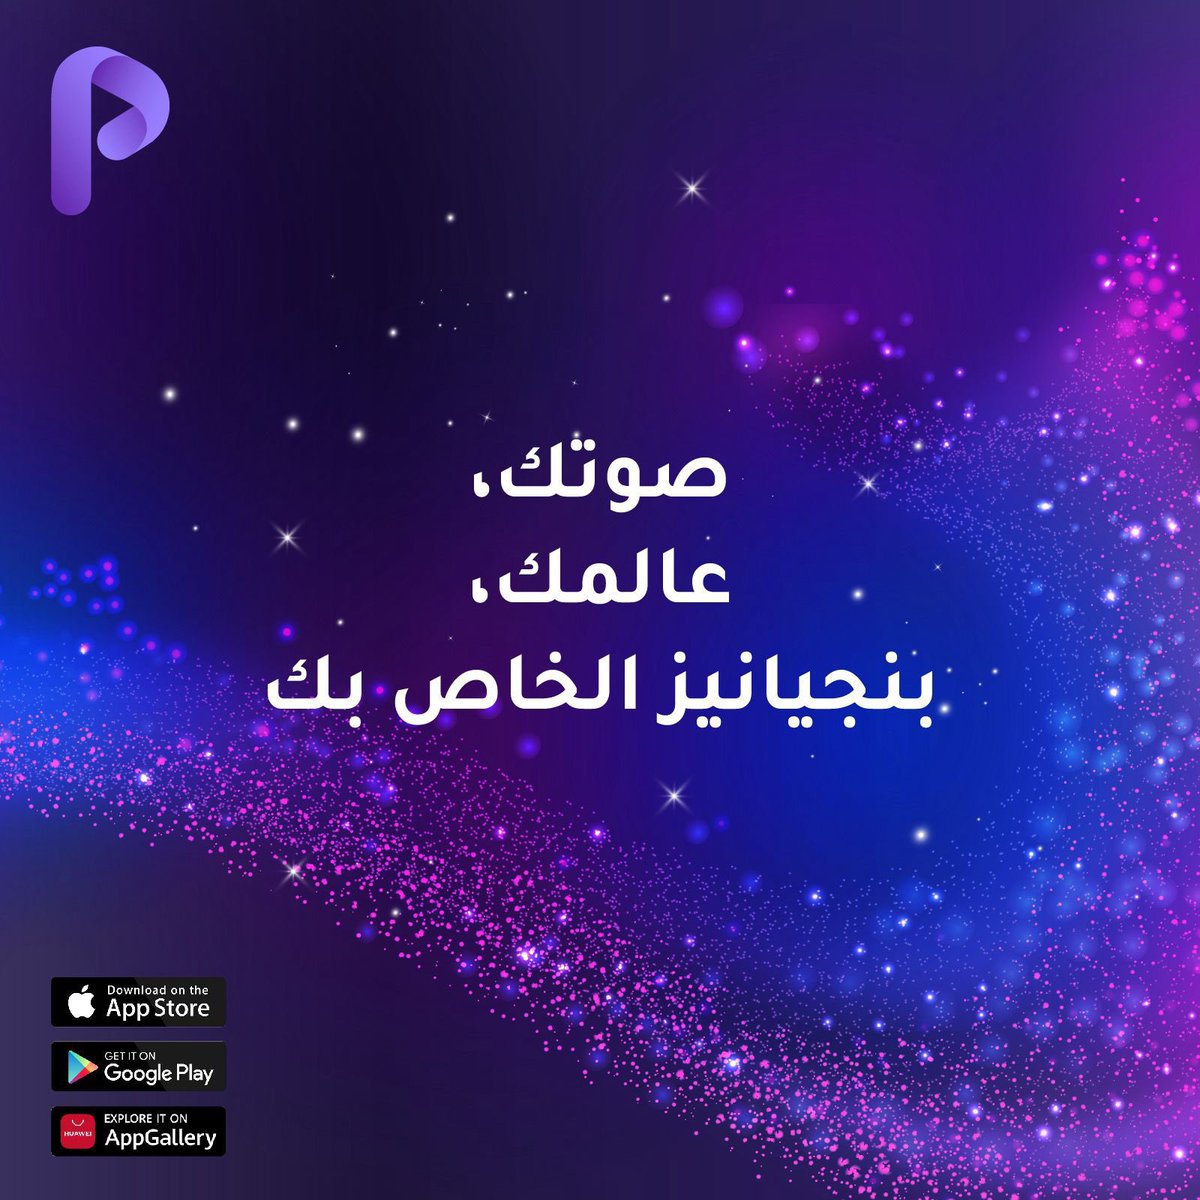 Yes, with Pangeanis, your voice truly matters. This is a space where you can freely share your stories, express your views, and connect with a diverse global community. Pangeanis is where you can truly be yourself.

نعم، مع بانجيانيز، صوتك مهم حقا. هذا هو المكان الذي يمكنك فيه…